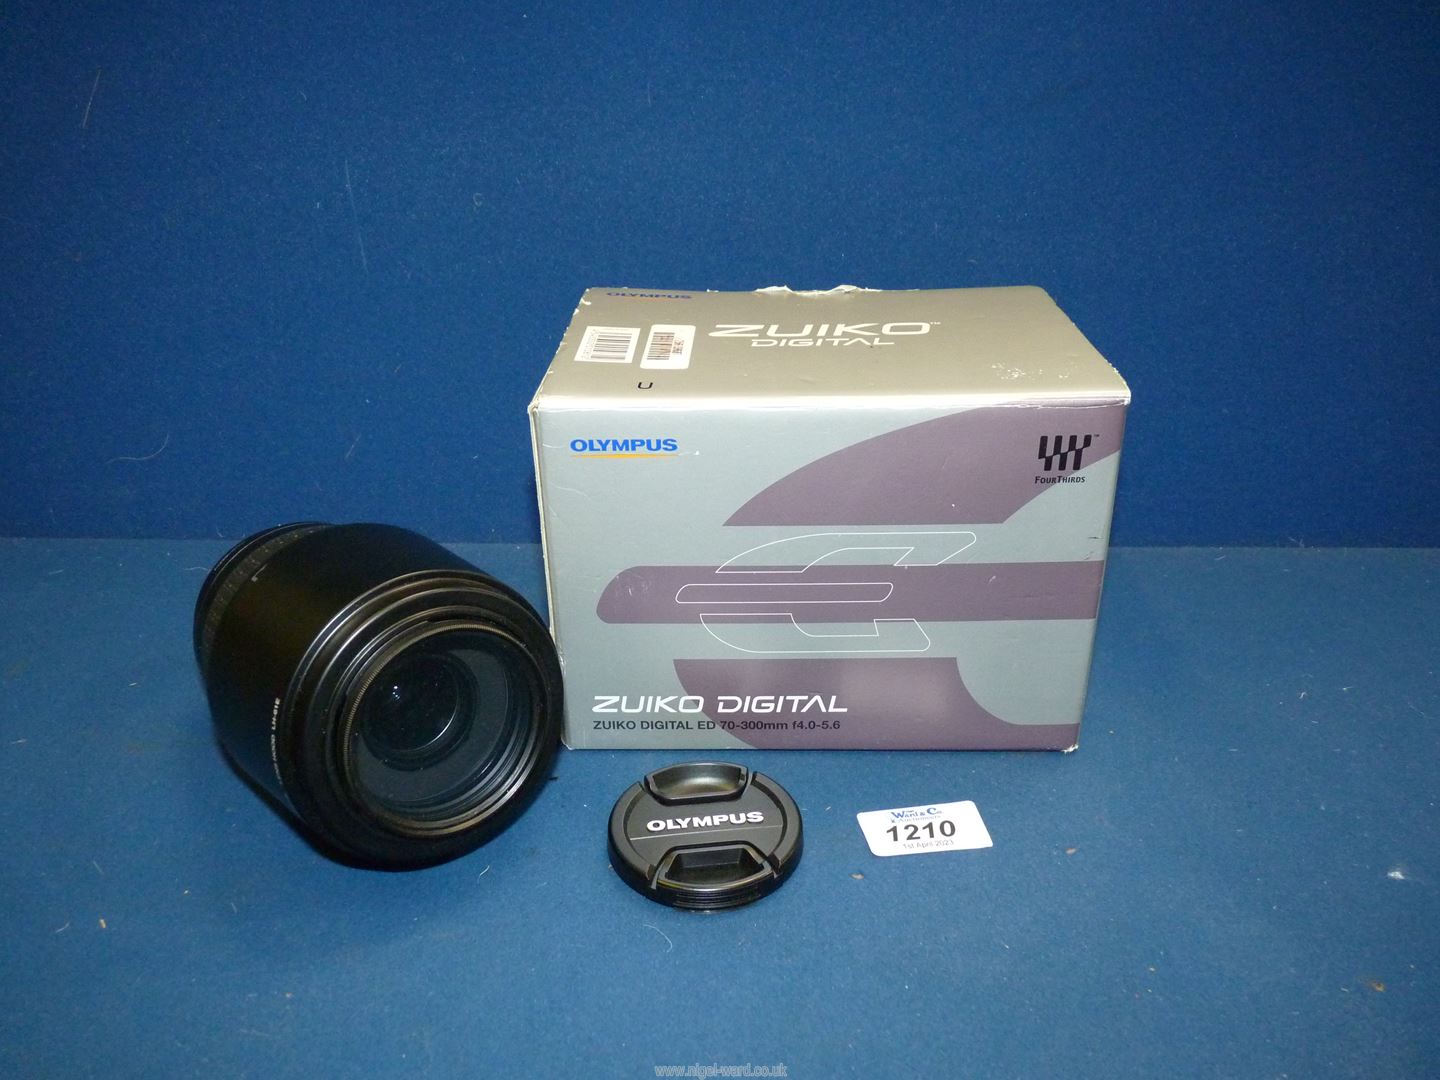 An Olympus Zuiko Digital ED 70-300mm f/4-5.6 Zoom Lens, boxed with Caps and Lens Hood.